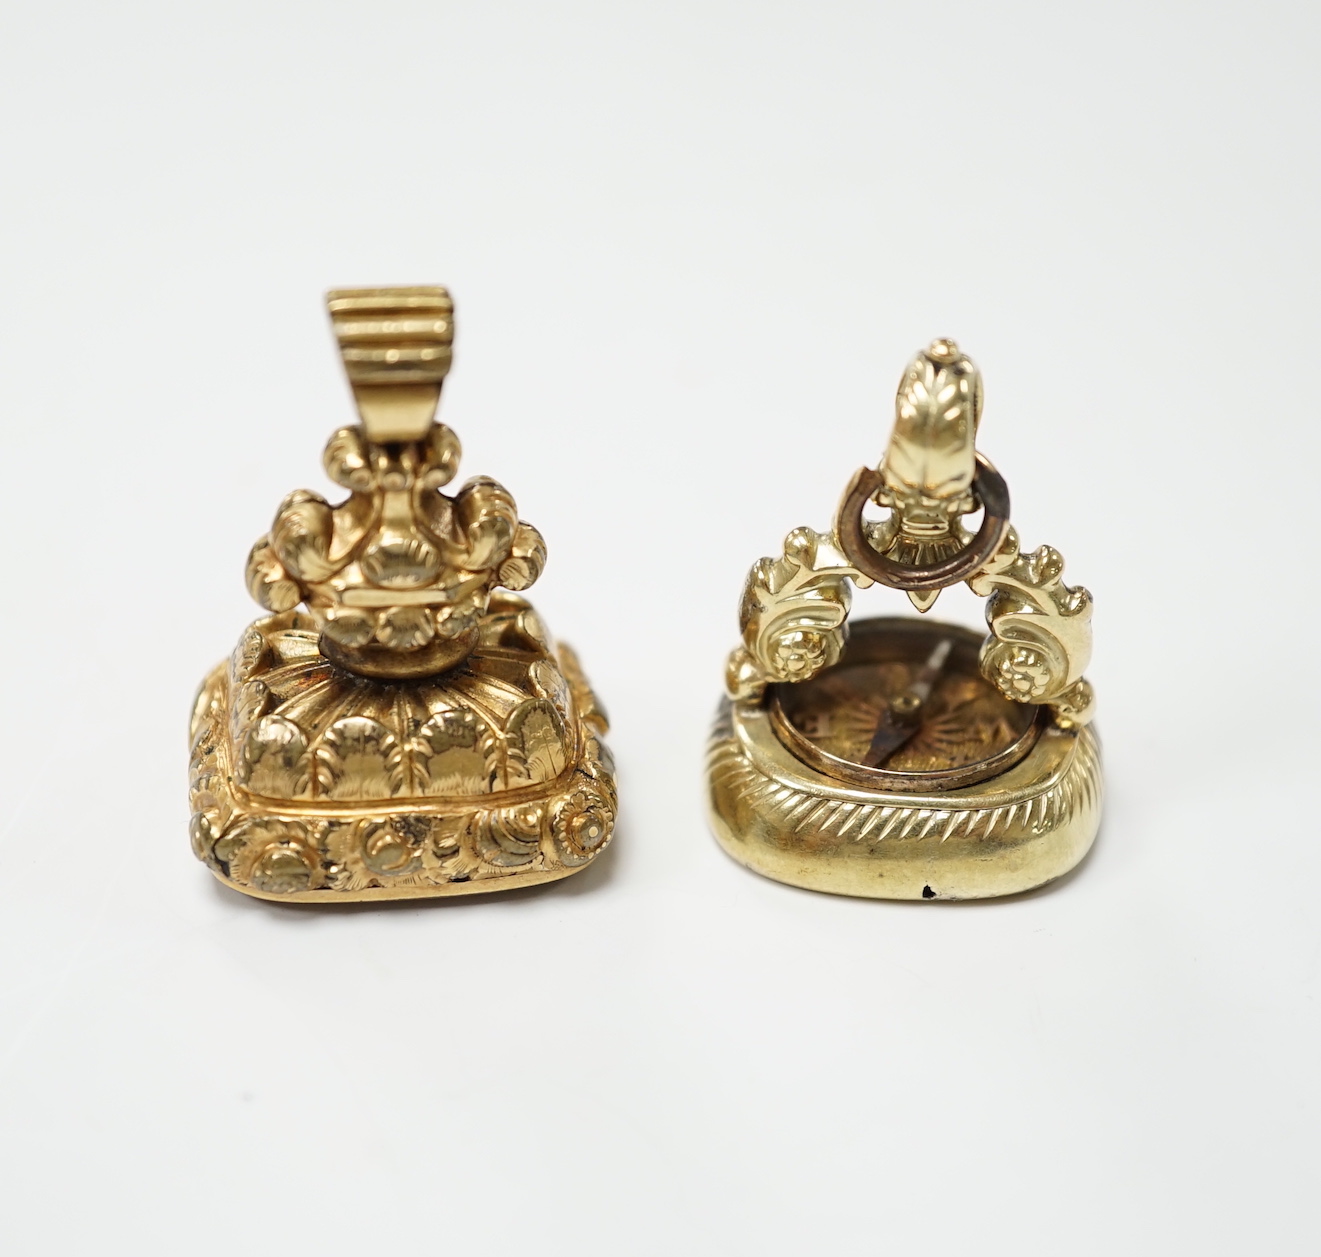 Two 19th century yellow metal overlaid fob seals, the largest 32mm with inset citrine carved with ornate crest and inscribed 'Joy of Life', the other with inset carnelian craved with bee and inscribed 'Non Sibi'.